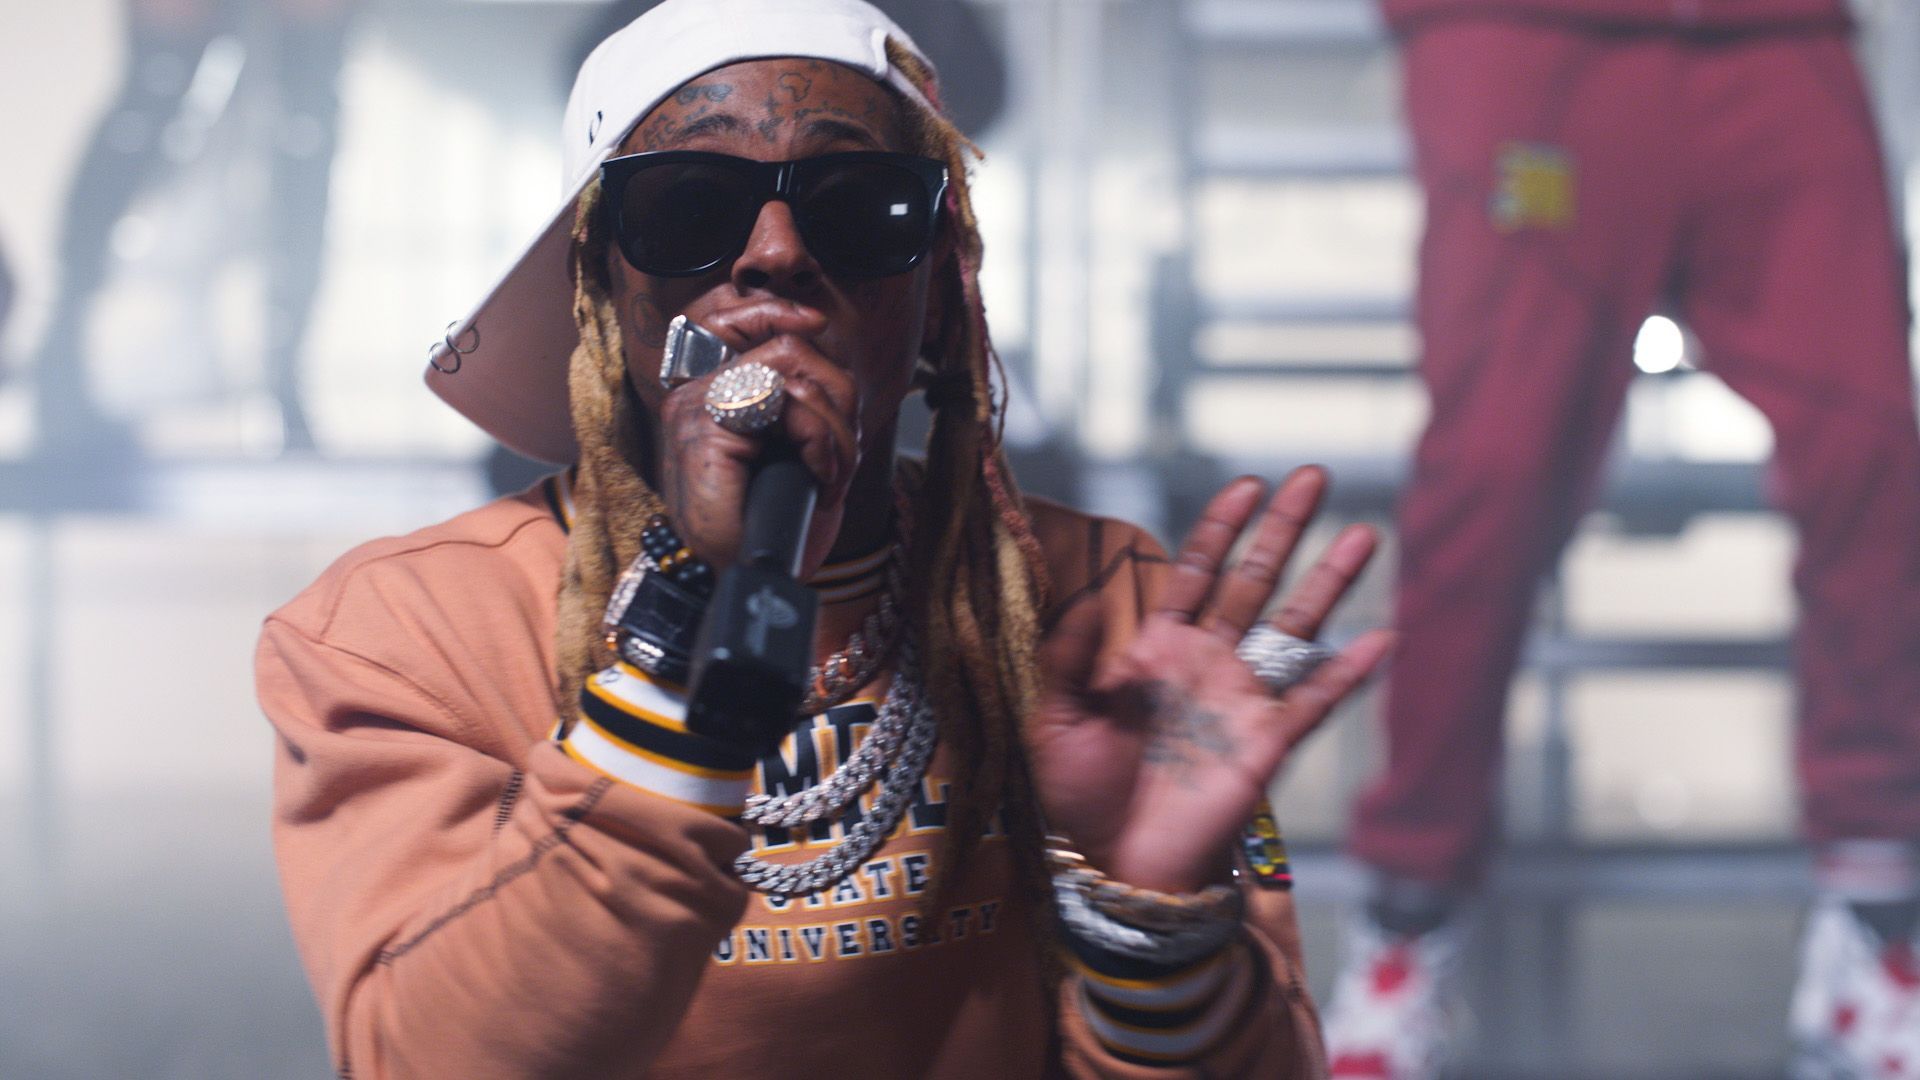 Lil Wayne wearing a white hat and glasses while performing